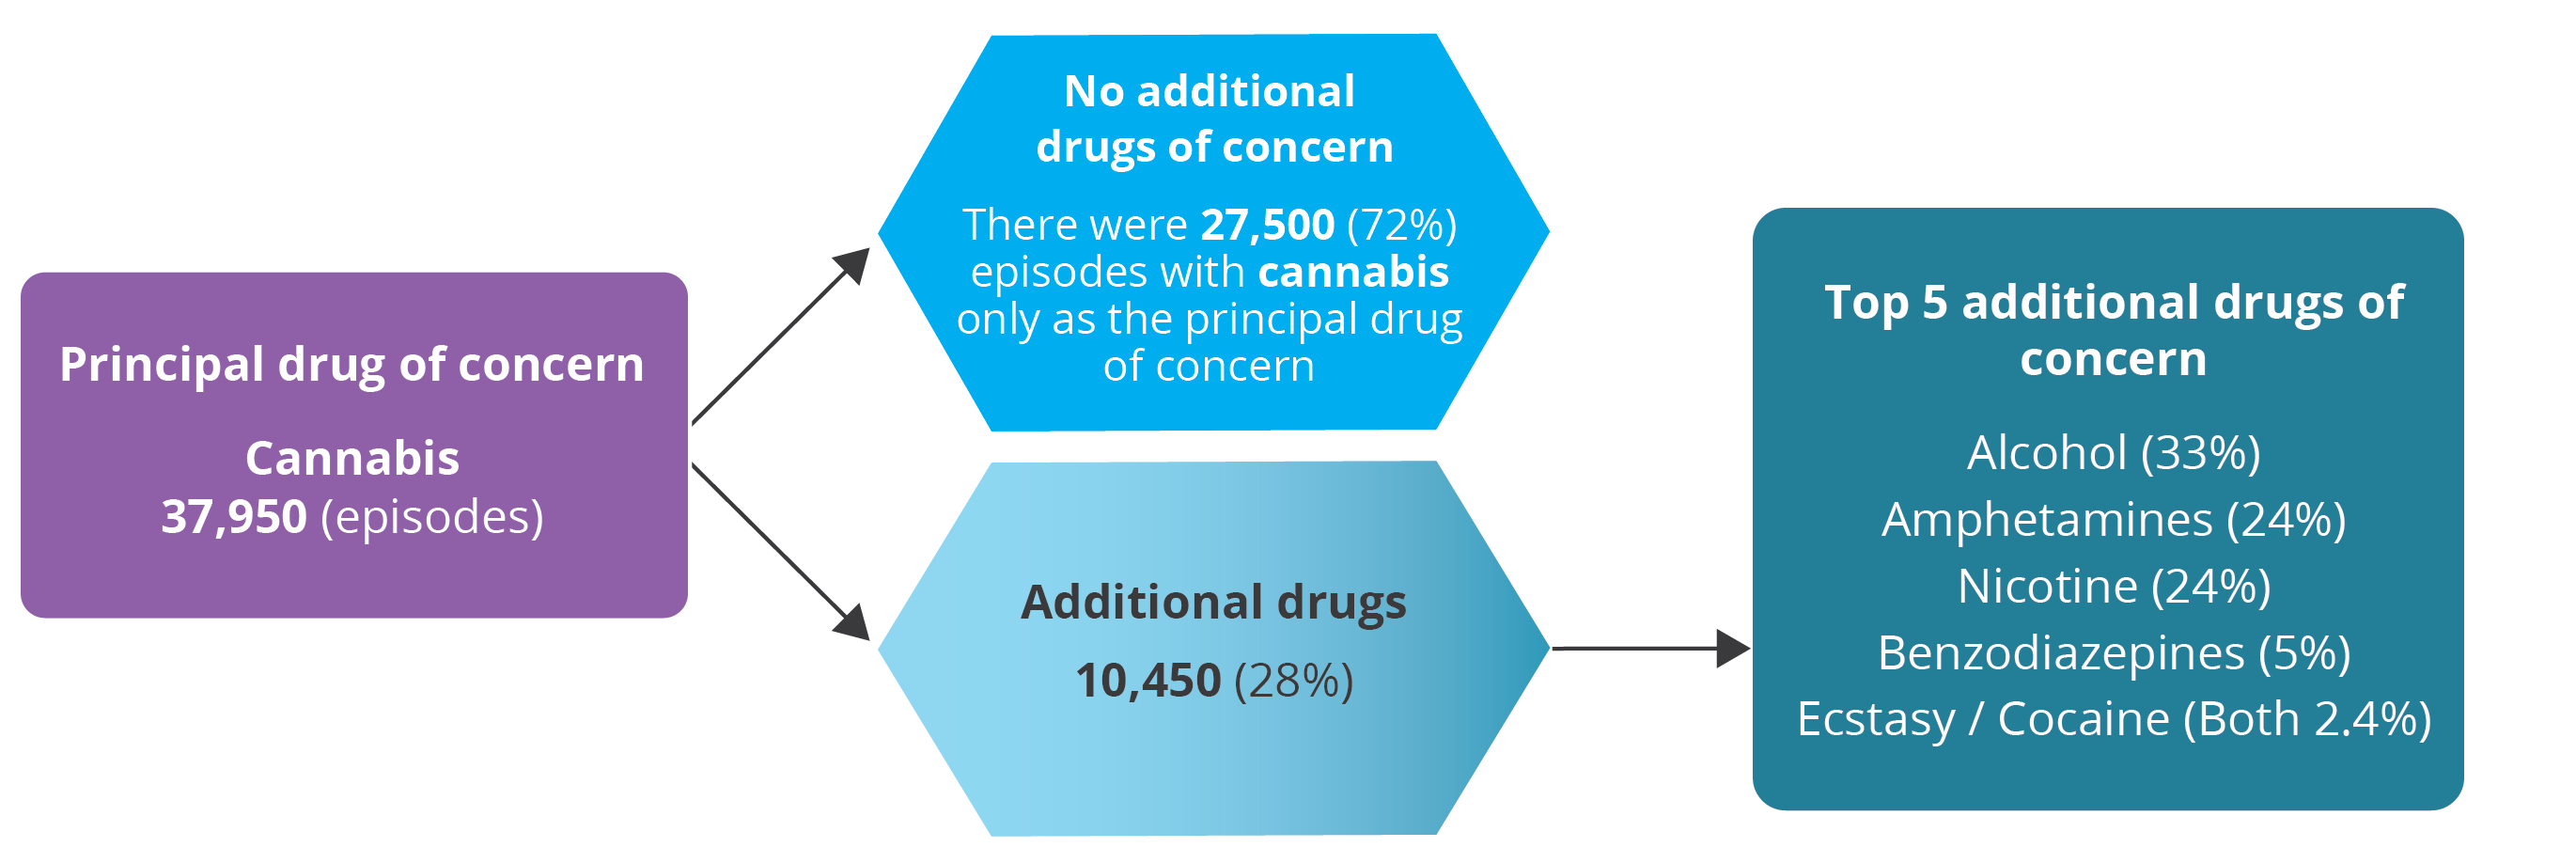 The flow chart shows cannabis as a principal drug of concern broken down by additional drugs of concern.